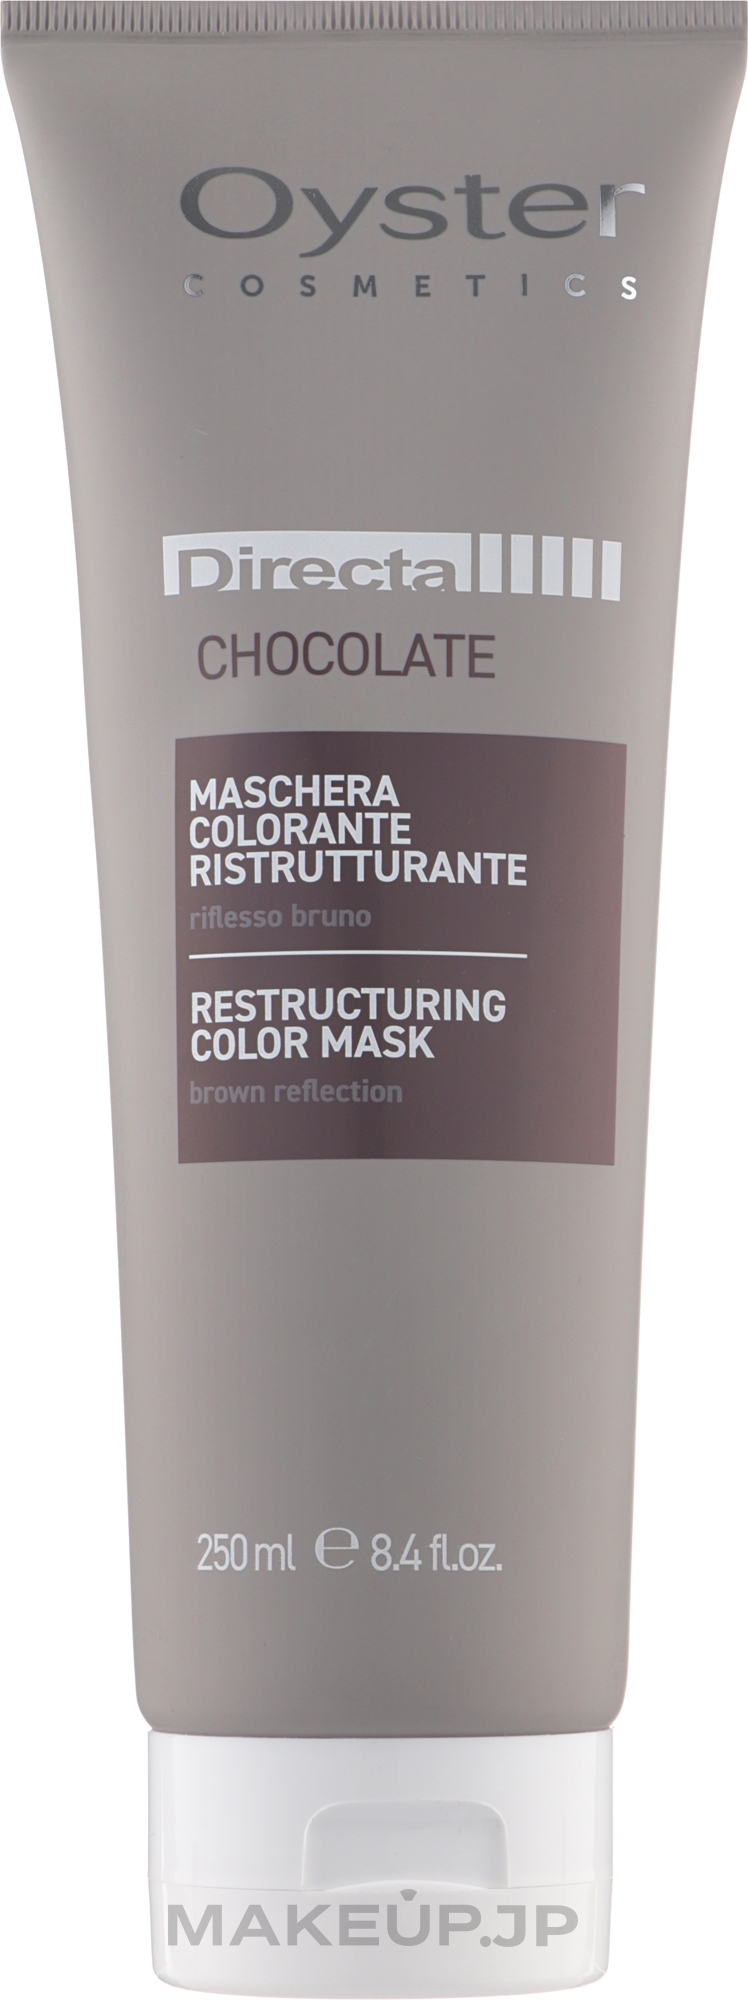 Toning Hair Mask - Oyster Cosmetics Directa Restructuring Color Mask — photo Chocolate